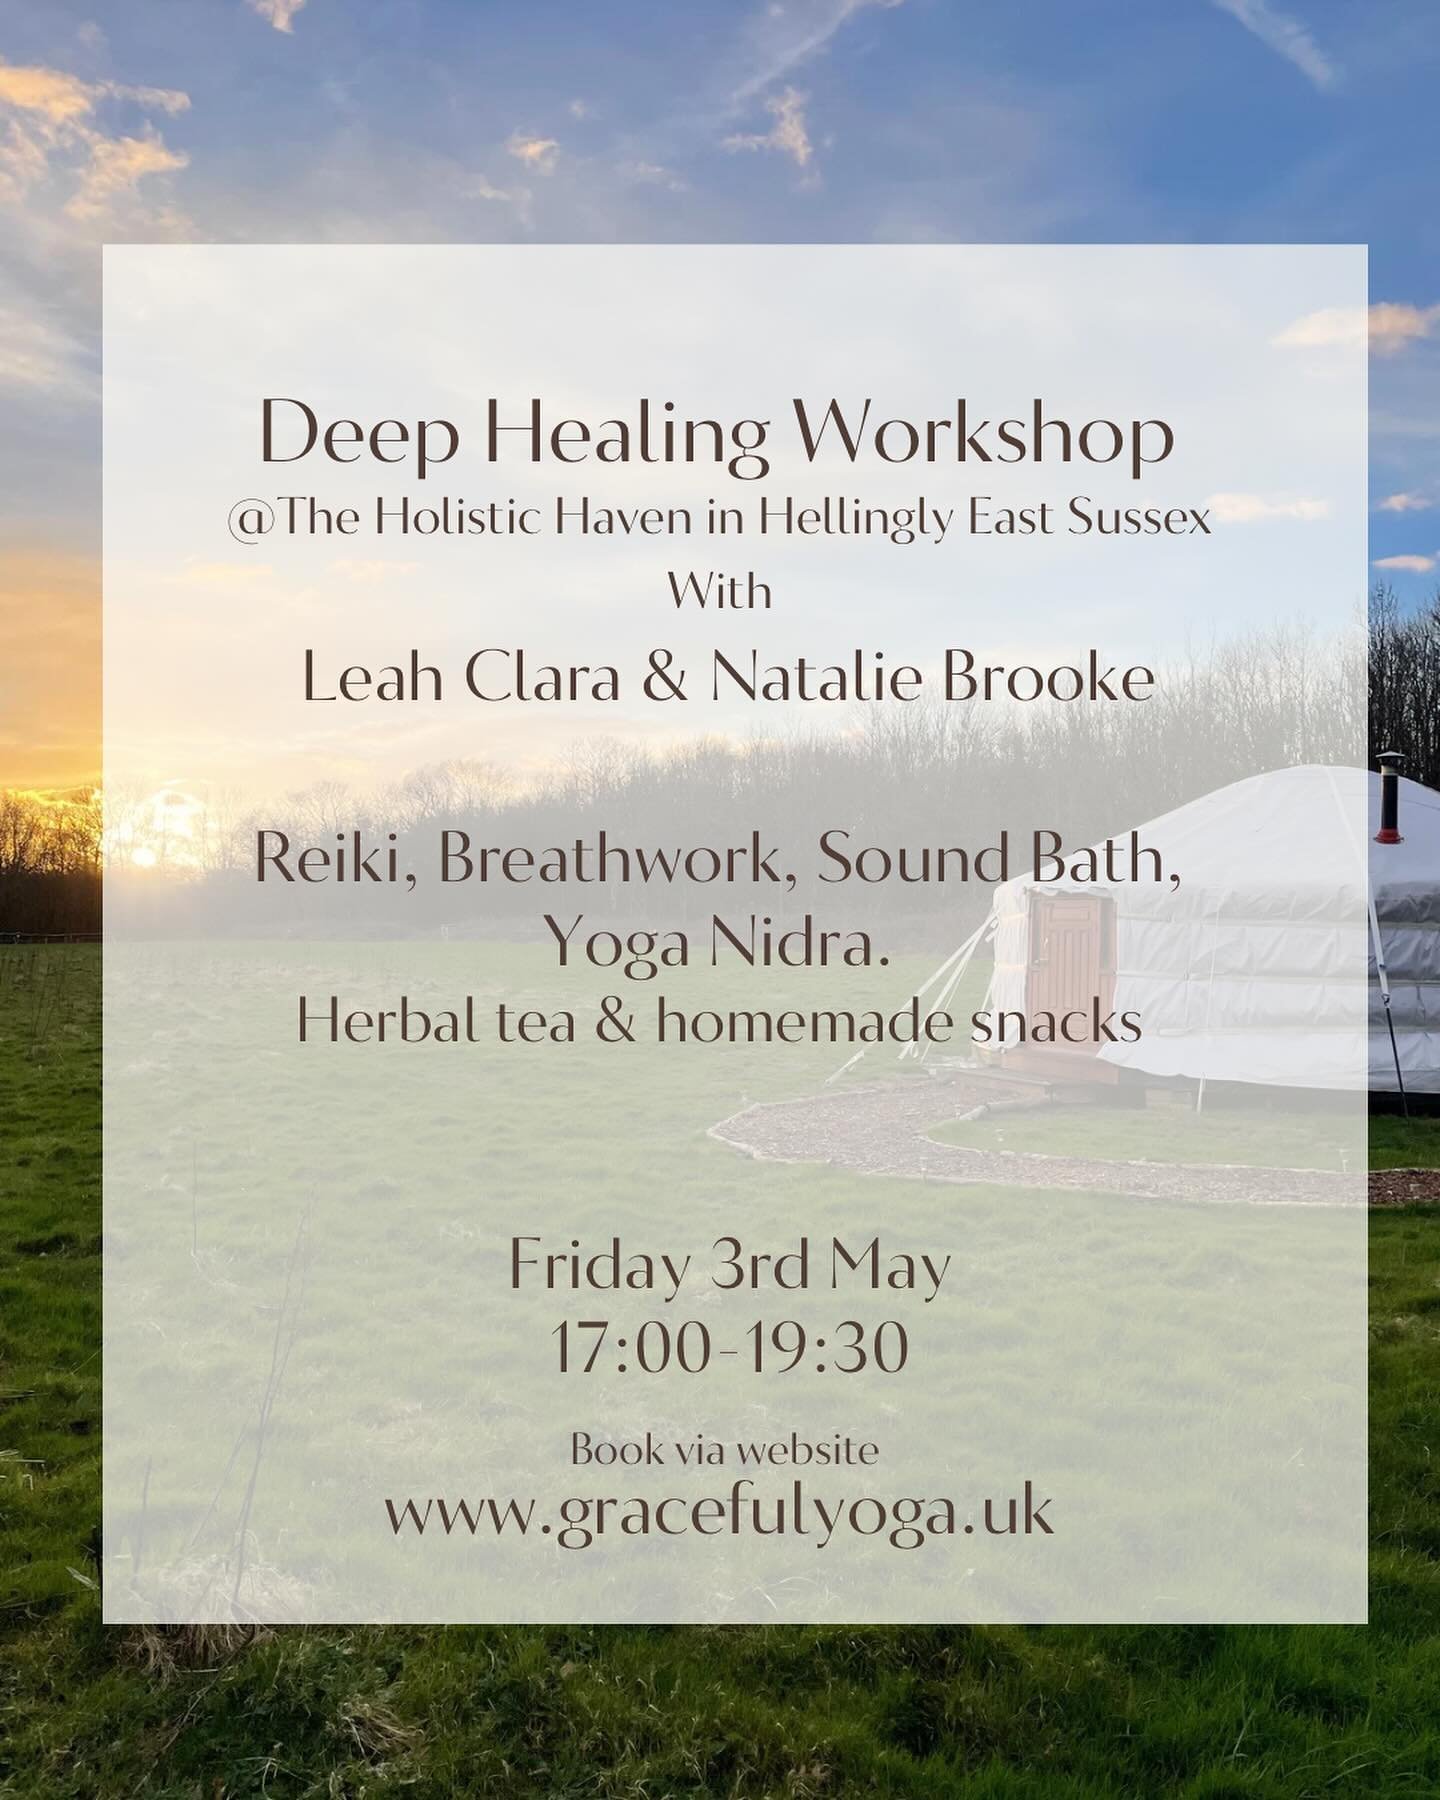 The date is out and ready to book for the next Deep Healing workshop 👇👇

Deep Healing Work shop with Leah Clara @spirit.of.reiki1 &amp; Natalie Brooke @gracefulyoga_uk 

Friday 3rd May 17:00-19:30 

At @theholistichaven_uk e

Limited space of only 